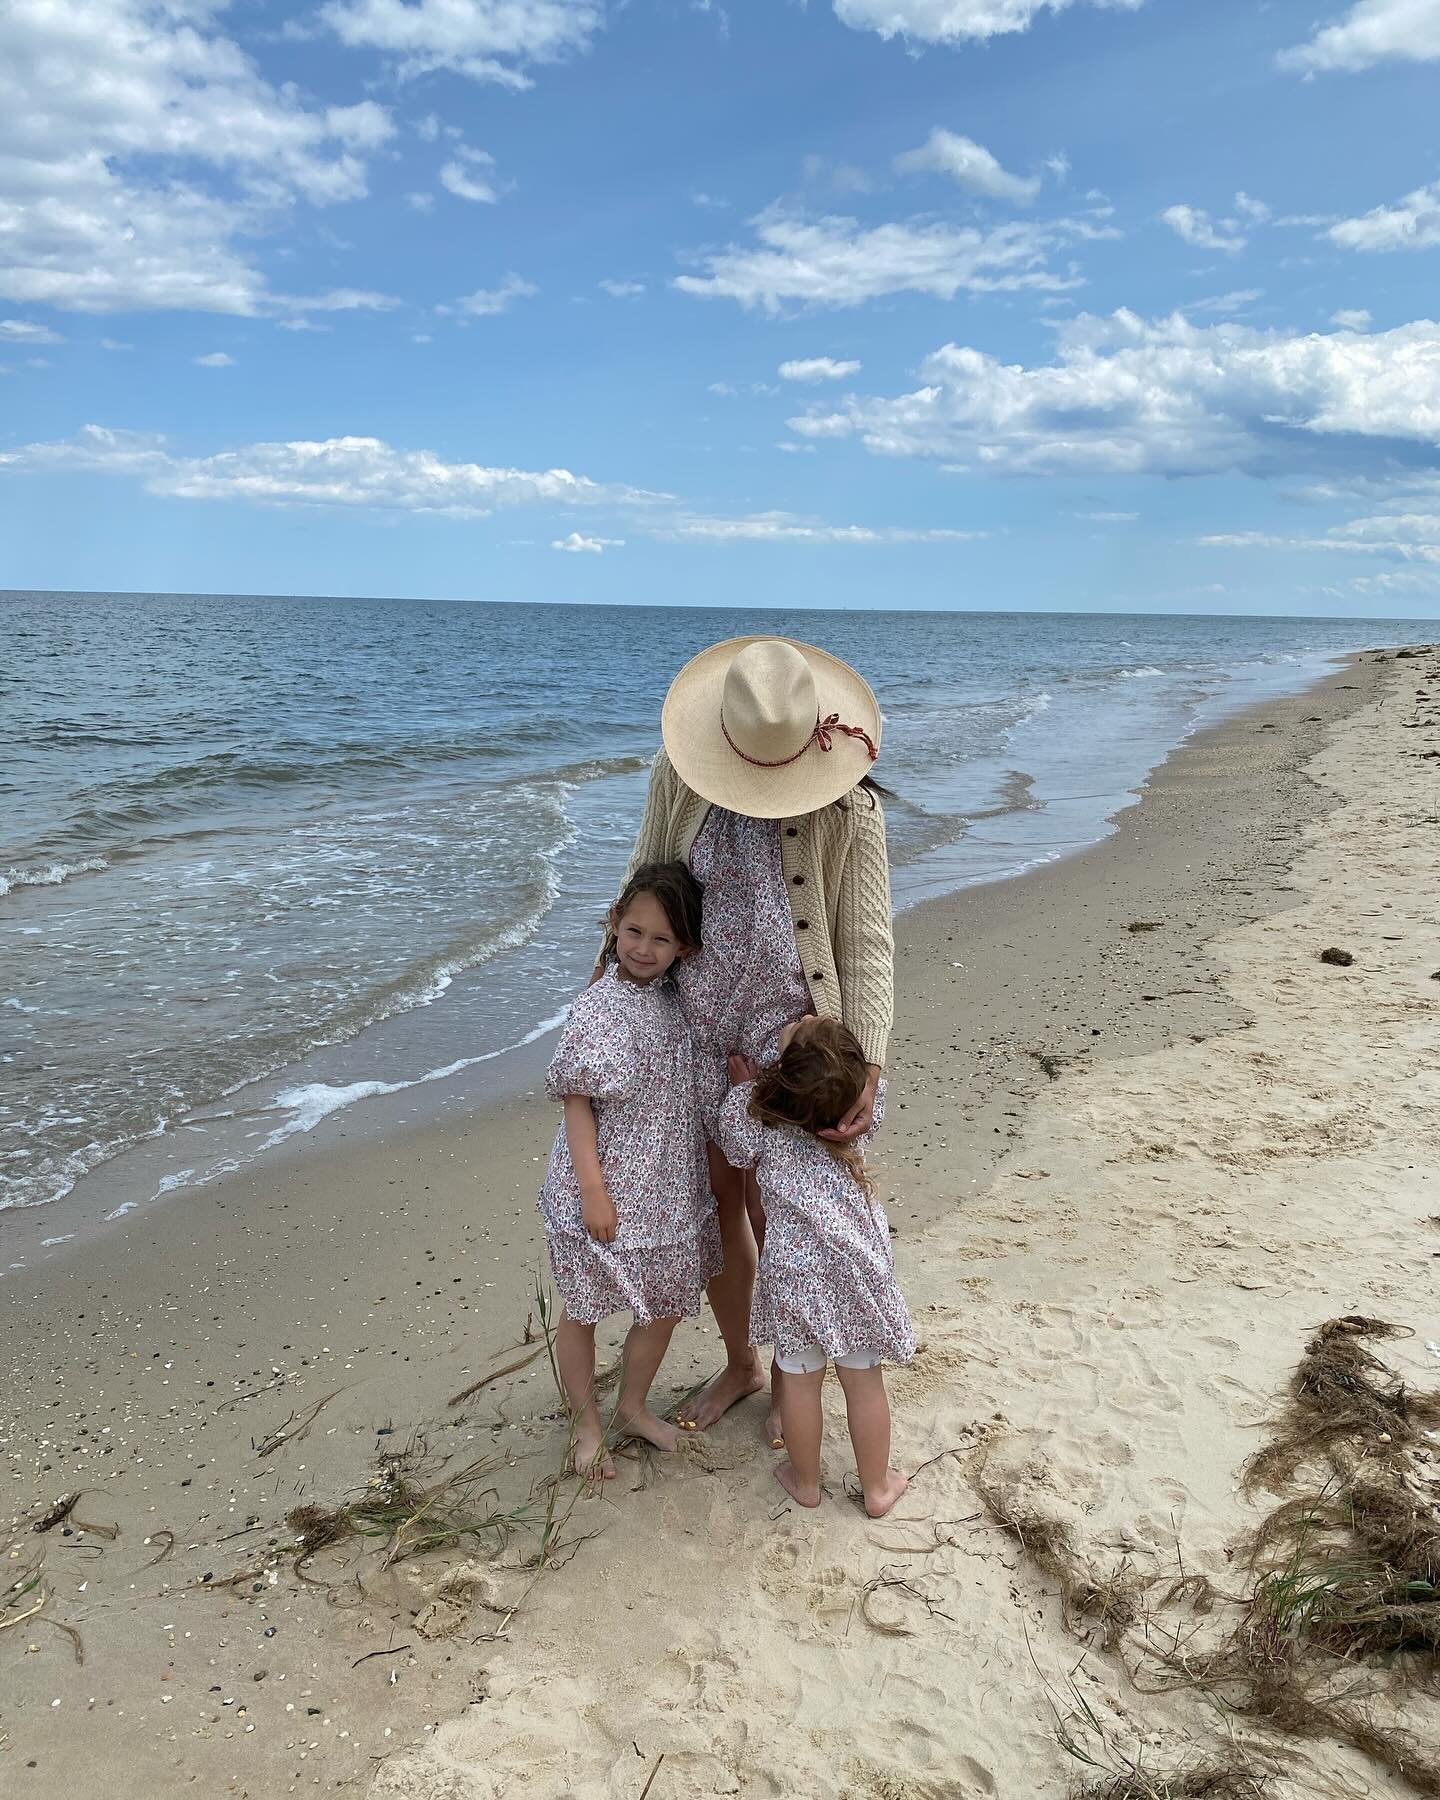 Thinking of the little big things like sunshine, waves, the laughter of delight and discovery, and the moments that make life Art.

Thank you to everyone who has made these moments for and with me, especially to my two daughters and my husband and be